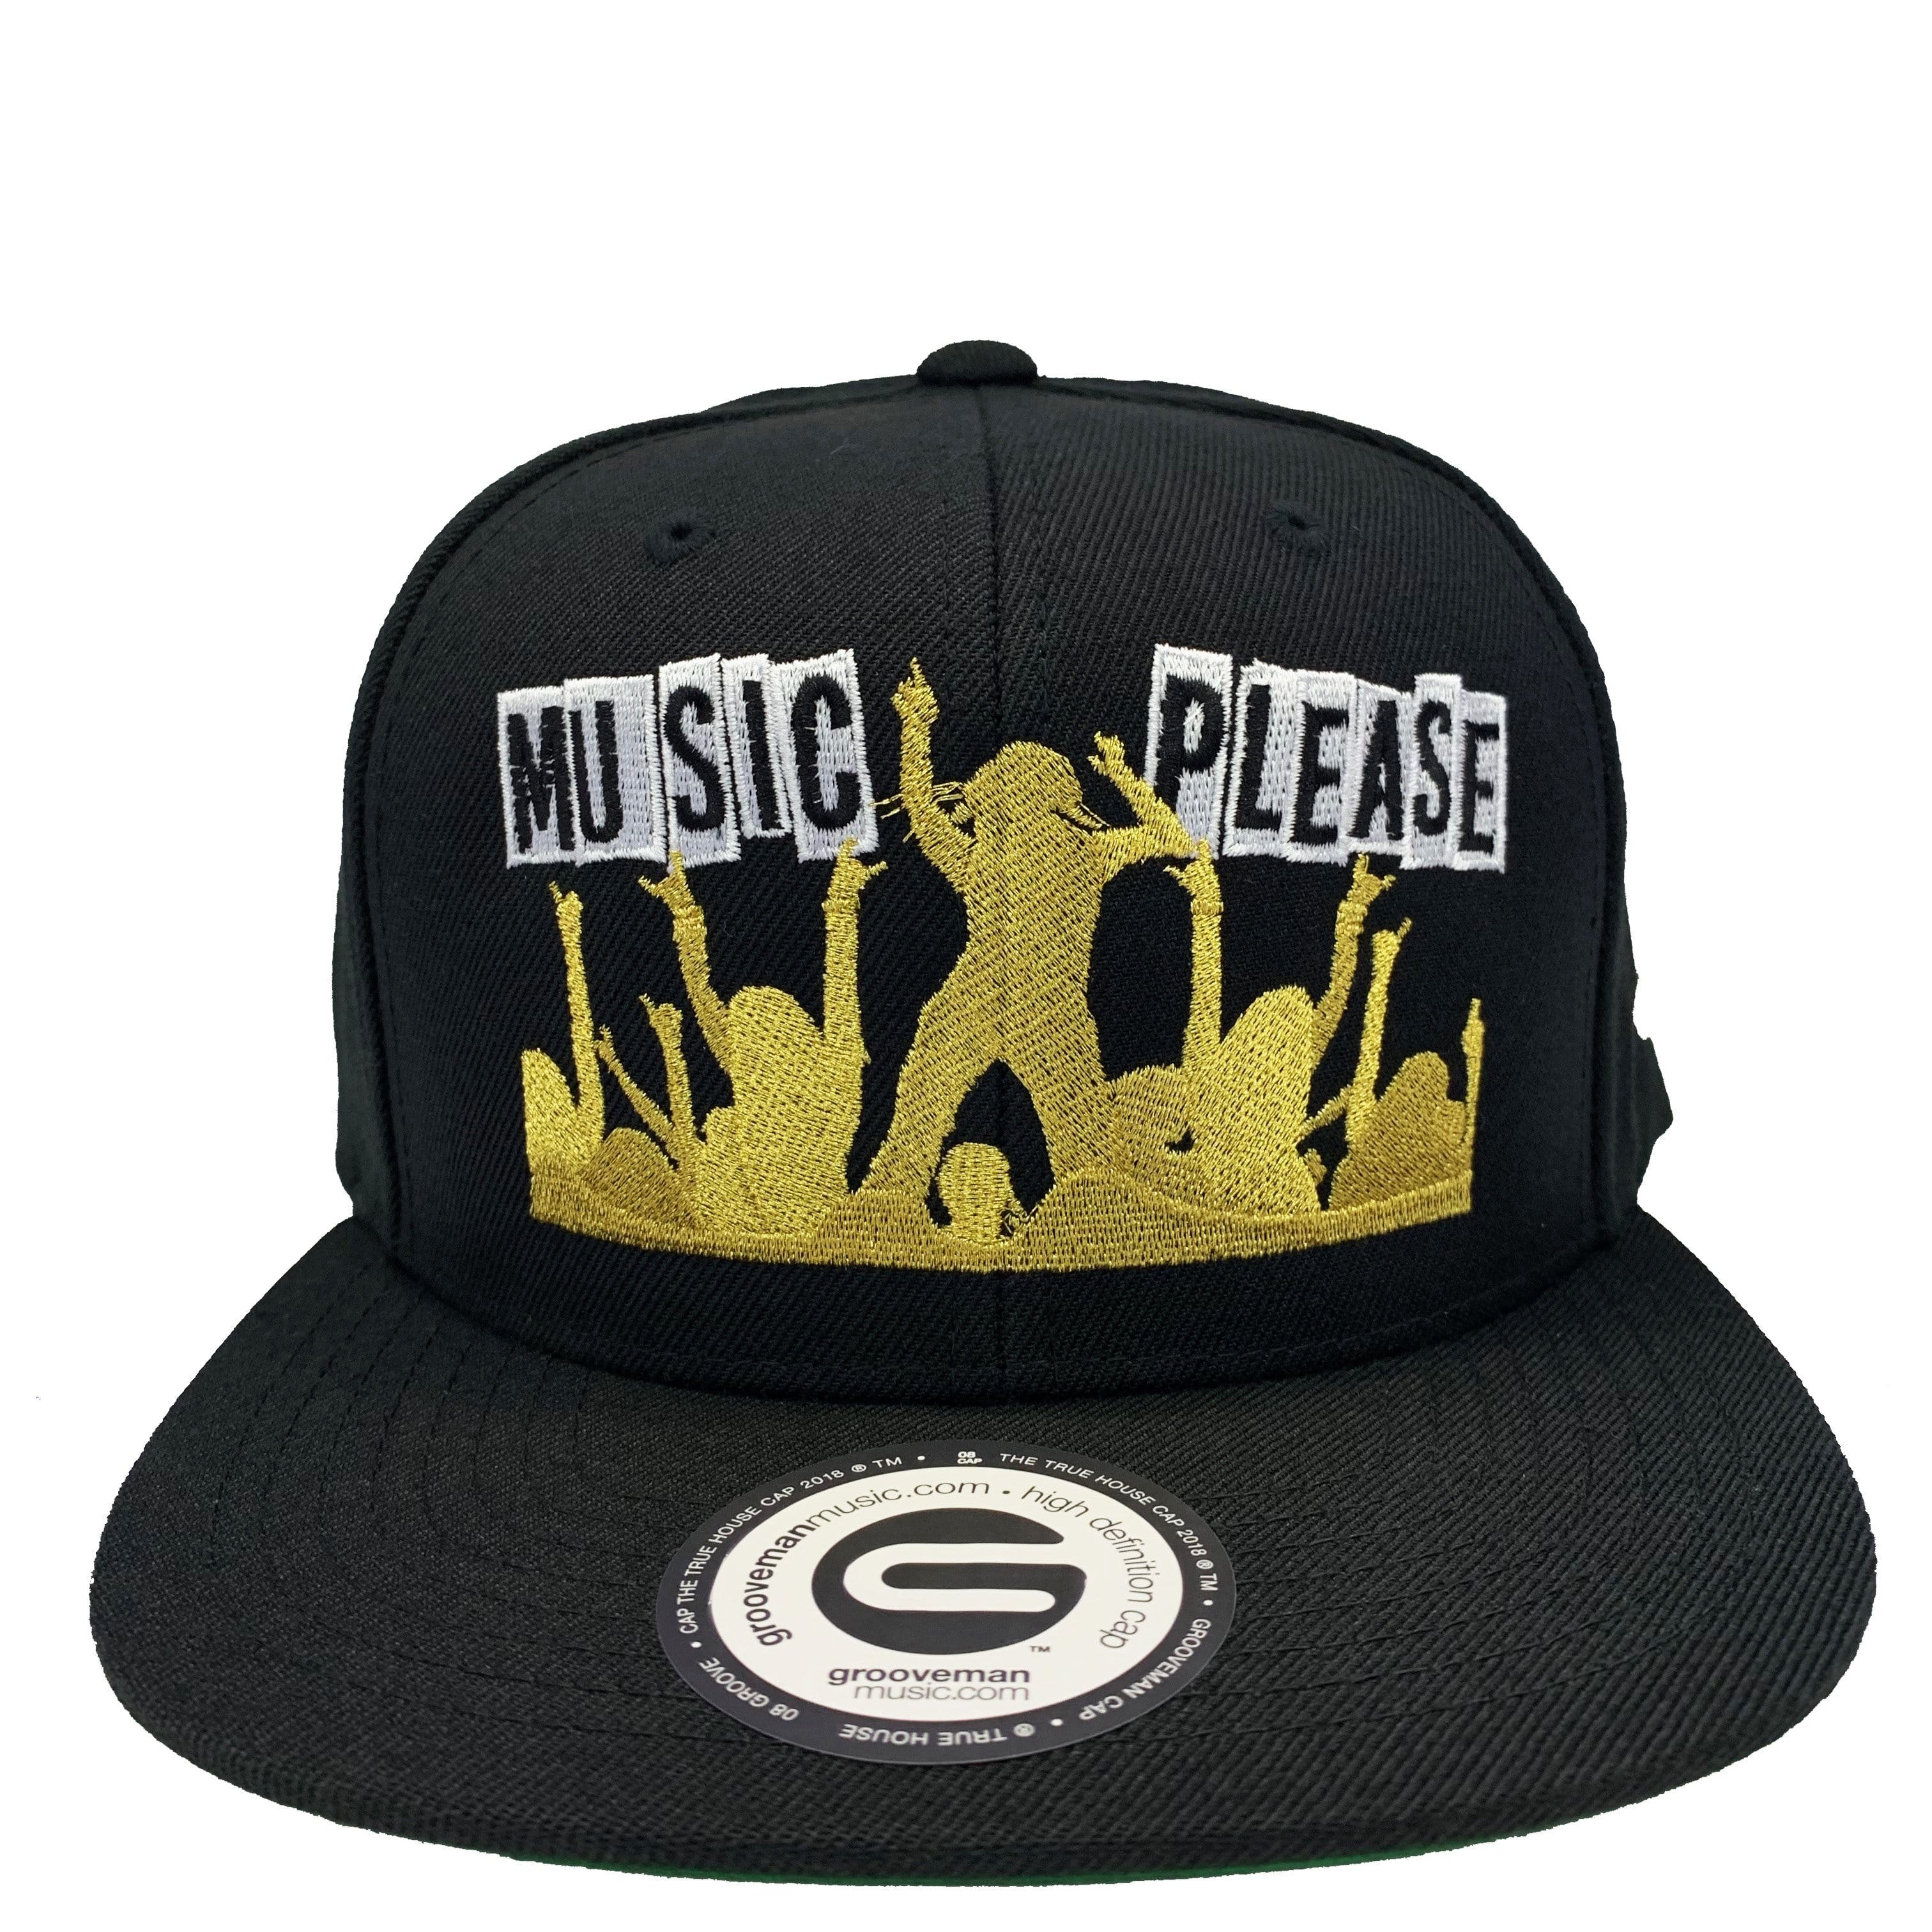 Grooveman Music Hats One Size / Black Gold Music Please Dancing Snapback